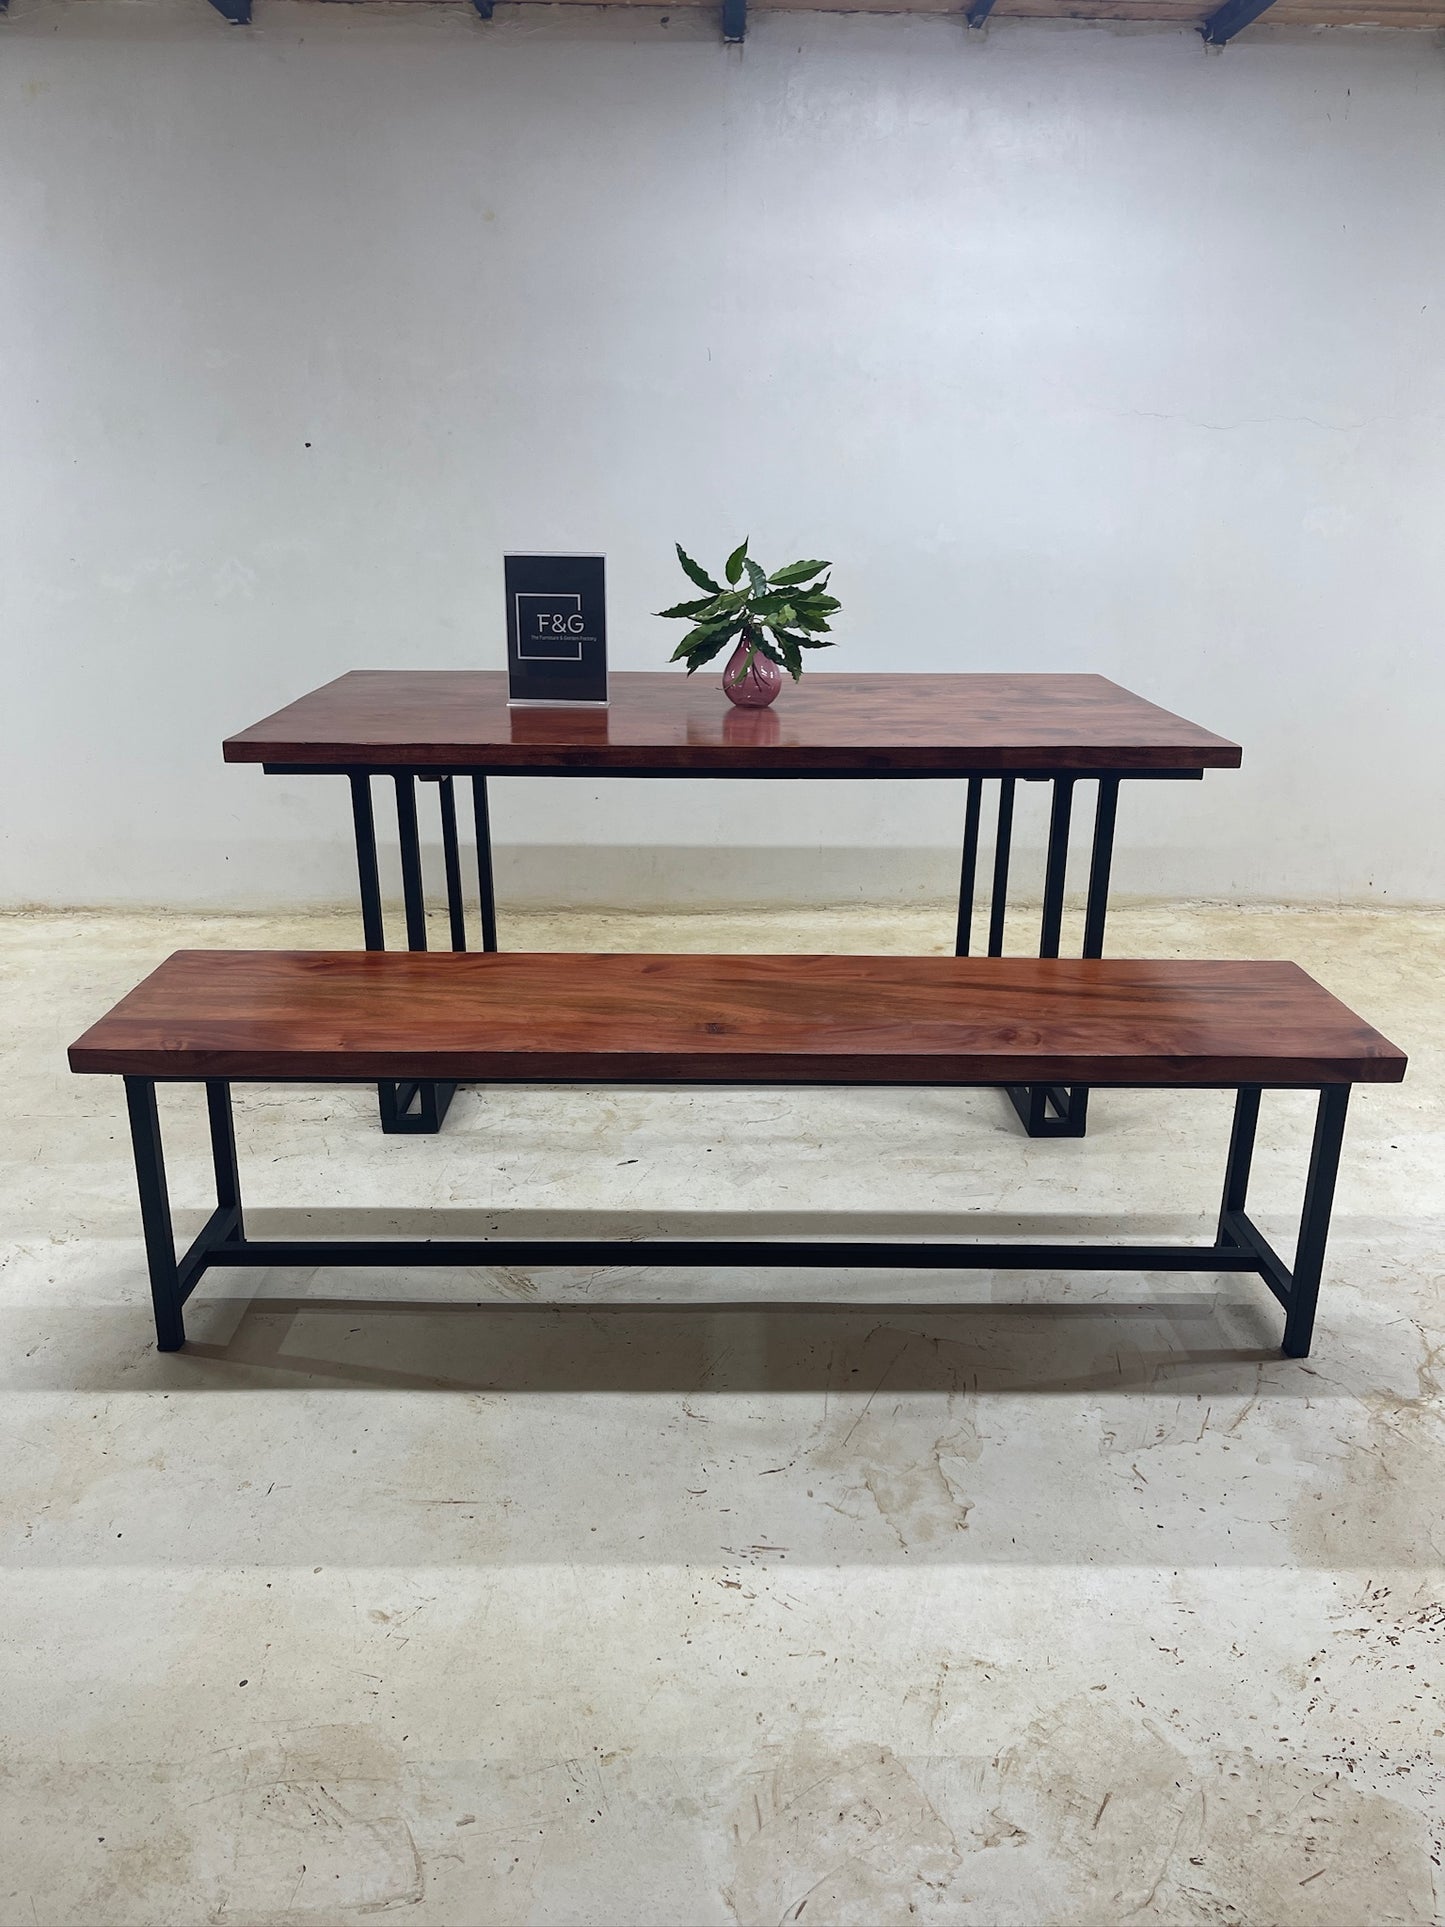 The Elba Dining Table